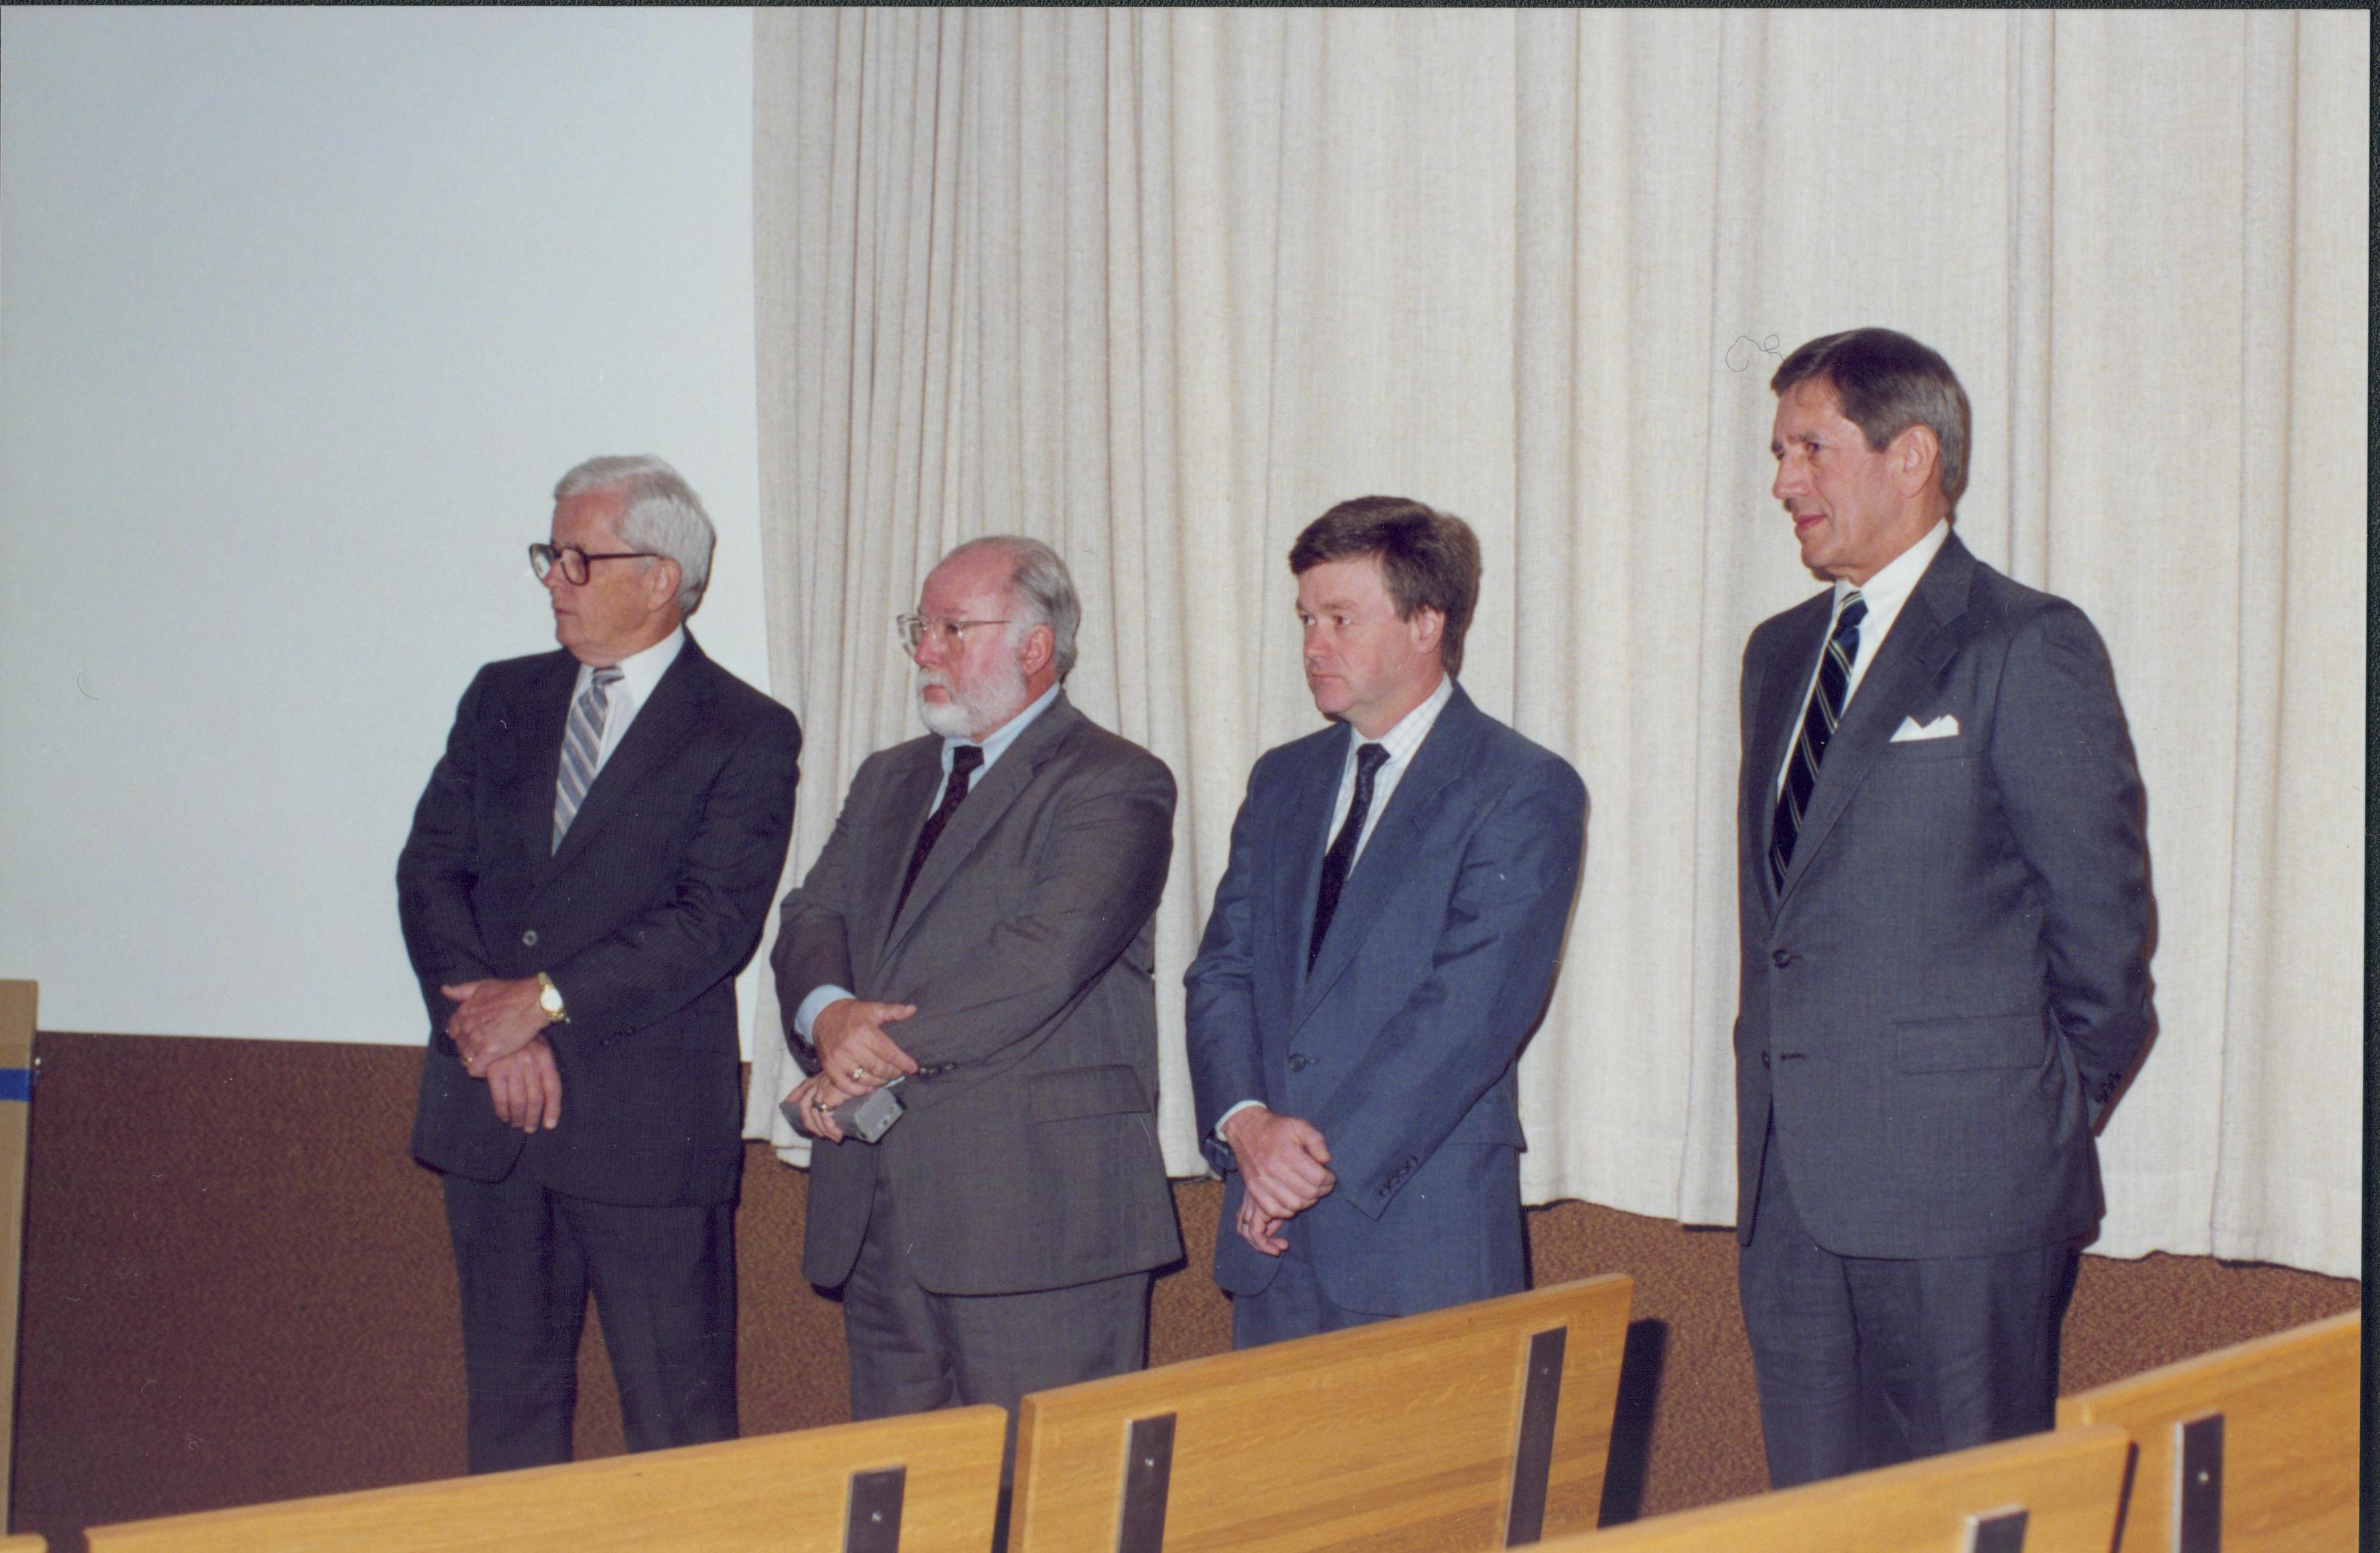 Four men standing in front of curtain. Lincoln Home NHS- Bring Furniture Back Home ceremony, presentation